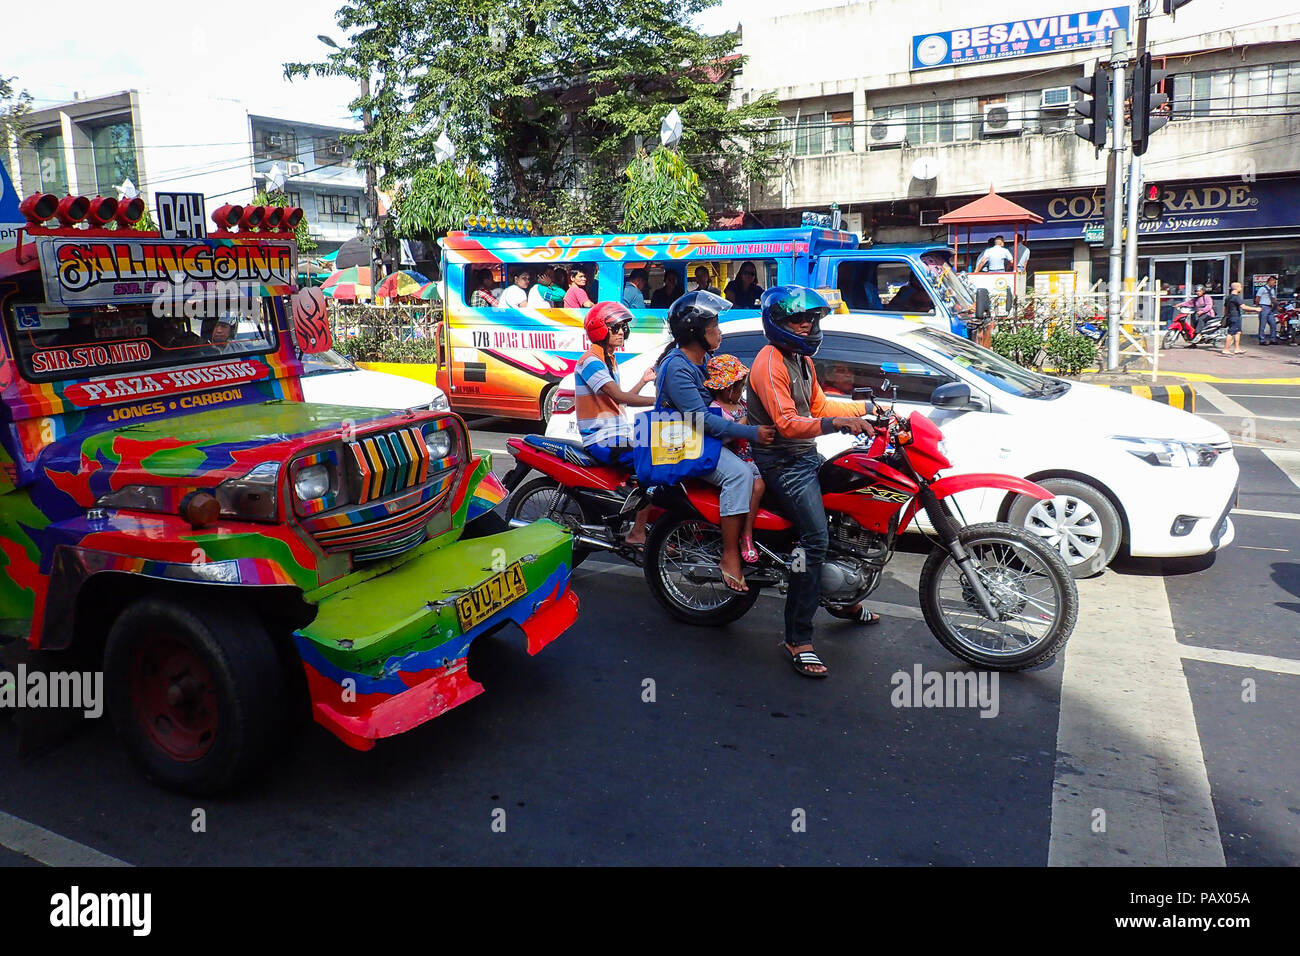 Cebu City, Philippines - January 15, 2015: Bikers wait at traffic light with cars and iconic jeepneys during Sinulog, a large festival each January. Stock Photo